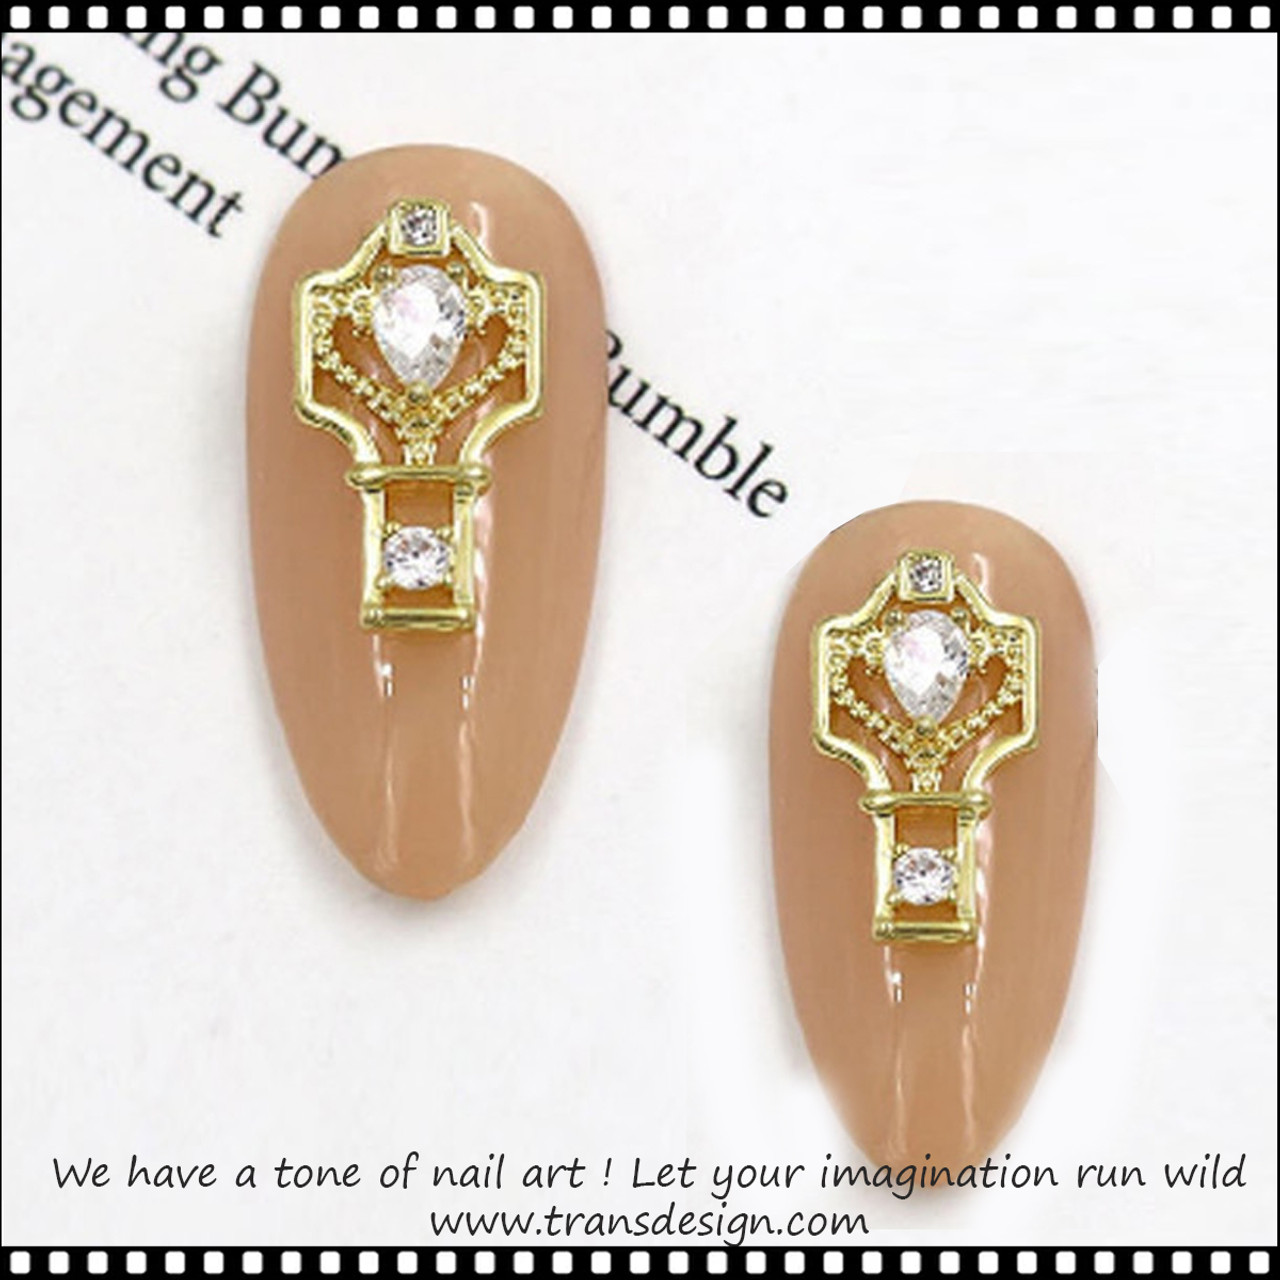 NAIL CHARM ALLOY CHANEL 5 Brands Name 2/Pack #W113-2001 - TDI, Inc